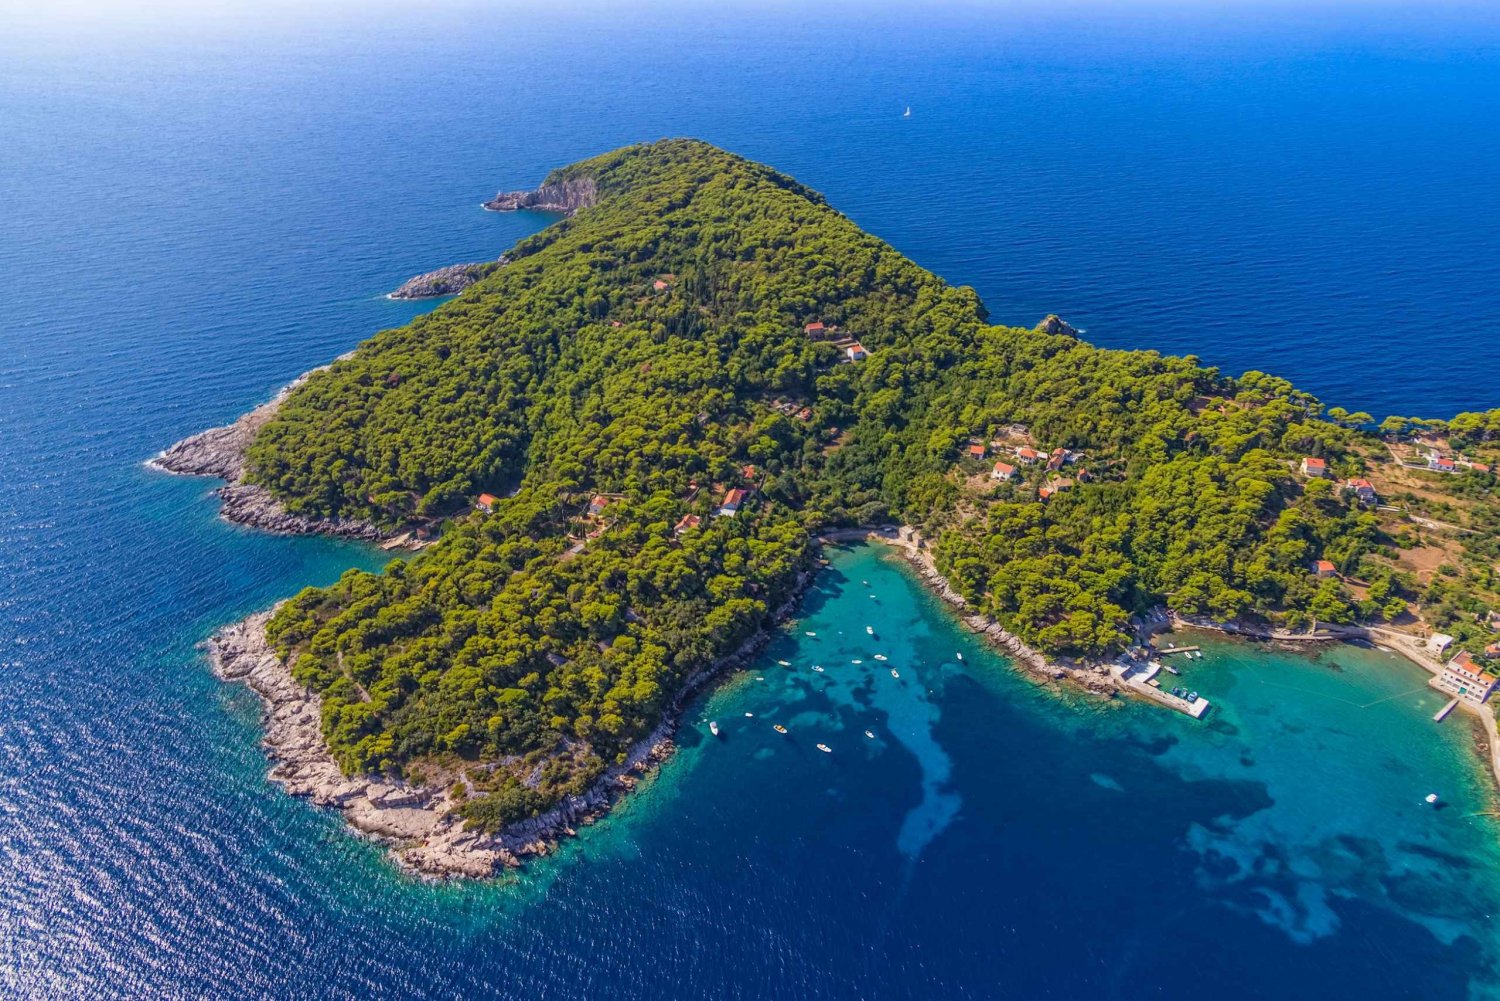 Elaphiti Islands: Full-Day 3-Island Tour from Dubrovnik